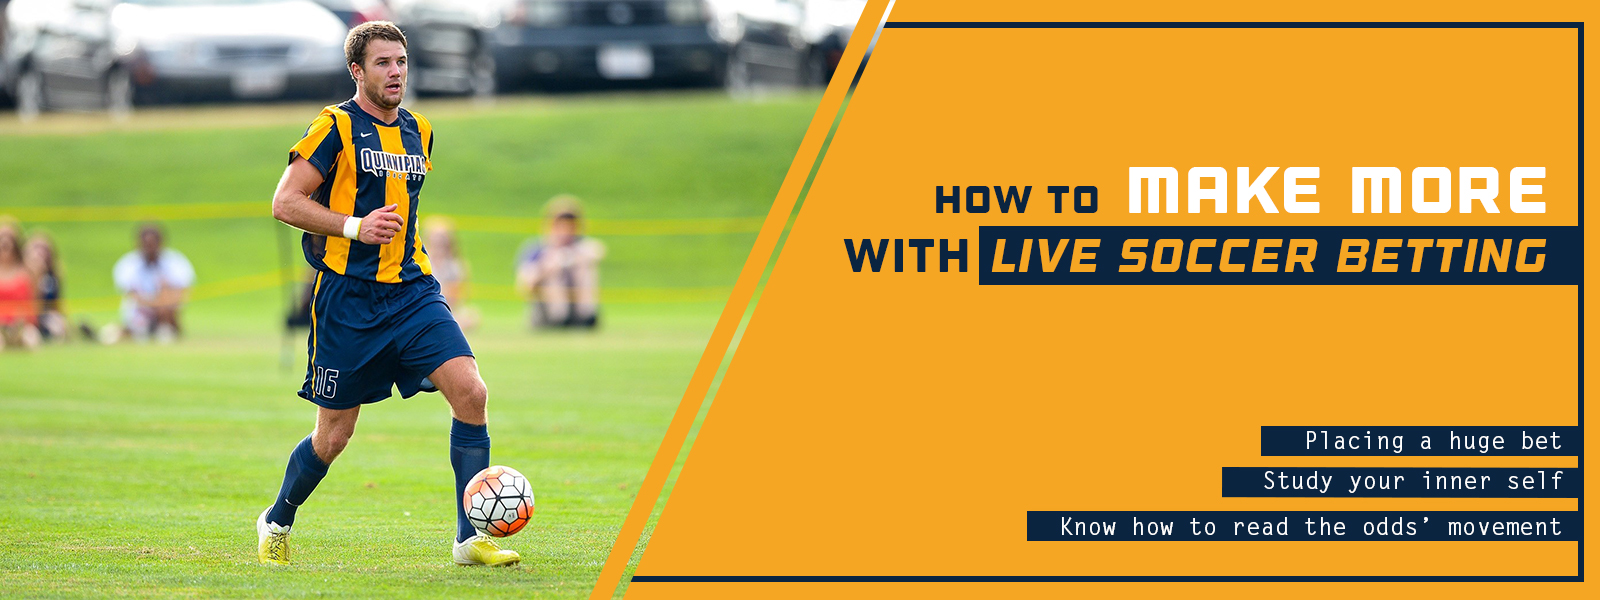 How to make more with live soccer betting